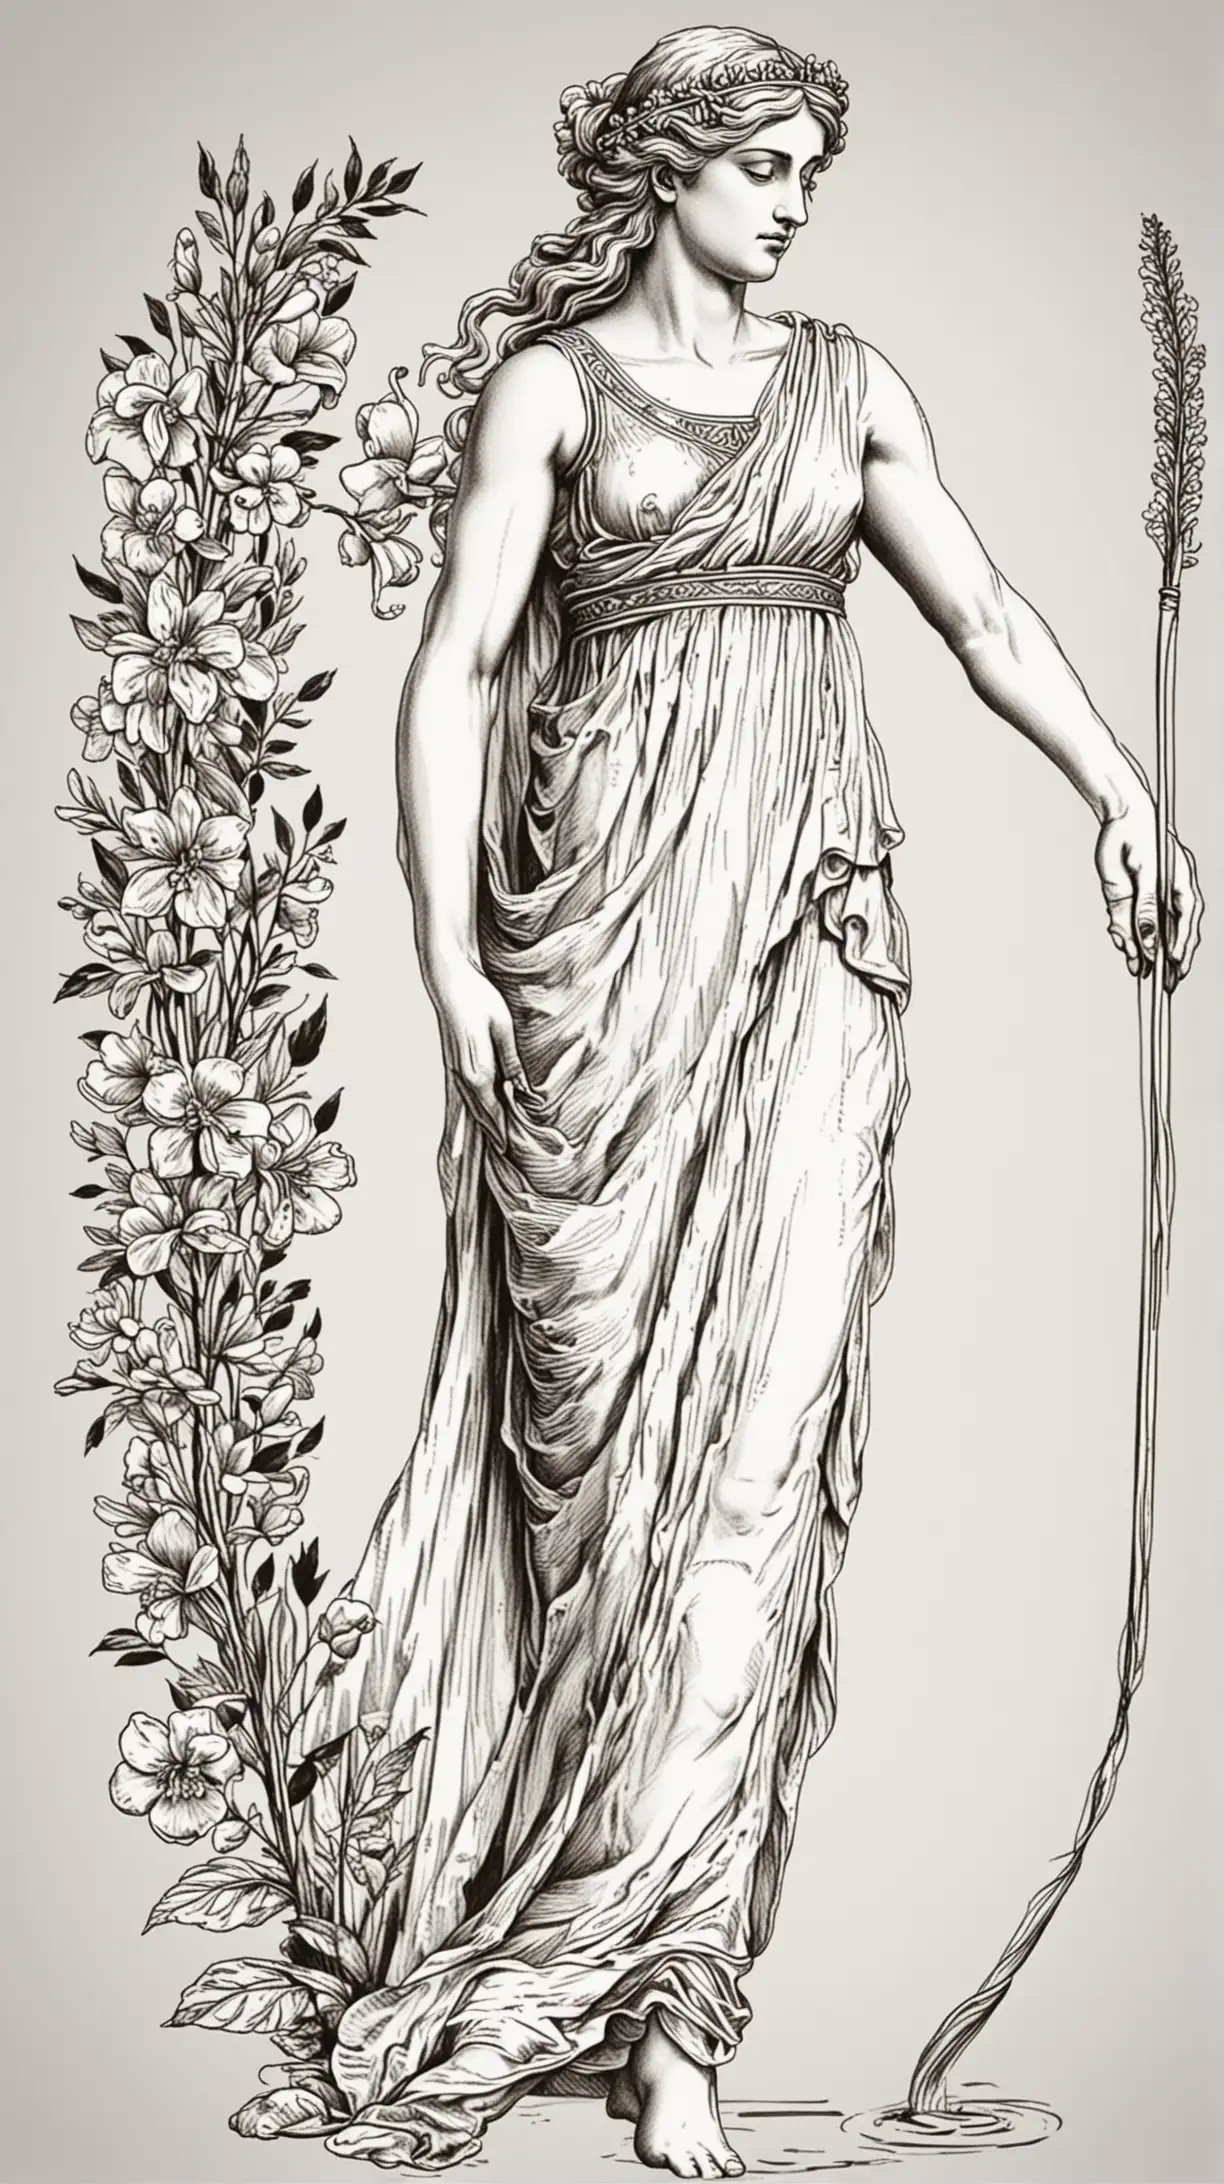 Greek Goddess Cleaning Flower with Line Art Style